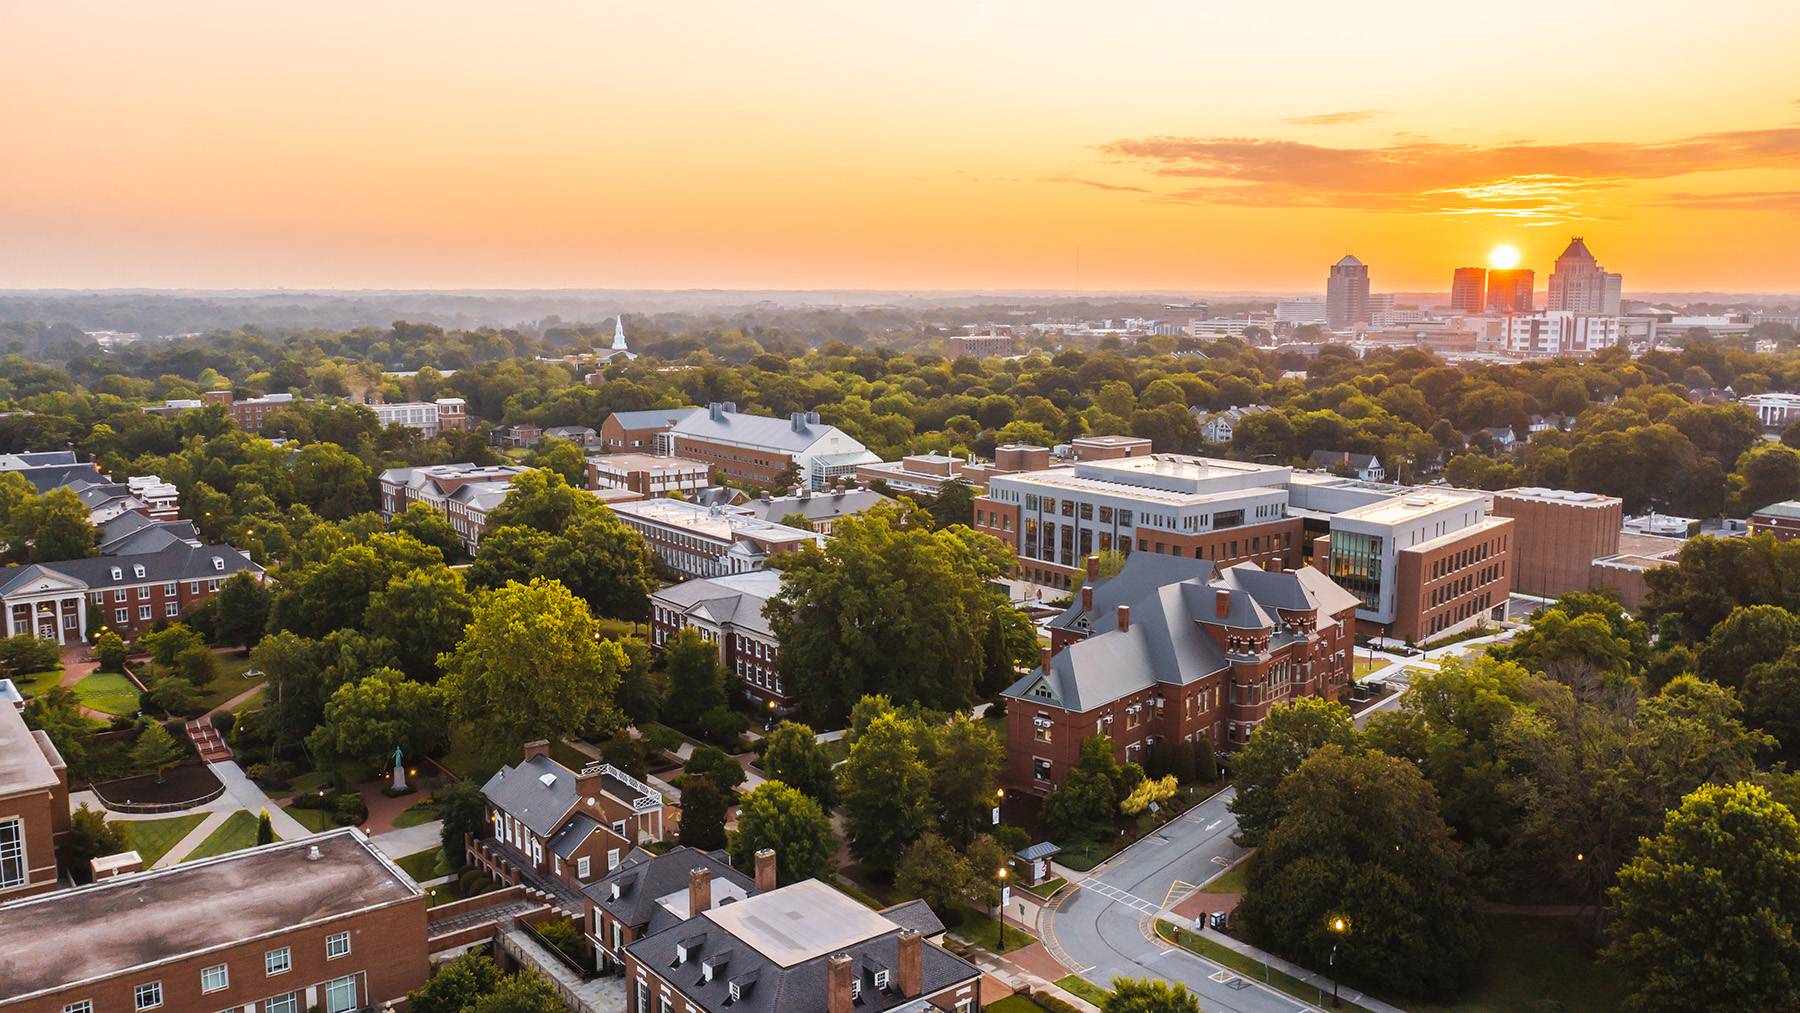 An aerial shot shows the UNCG campus at sunset in the foreground with the downtown Greensboro skyline in the background.